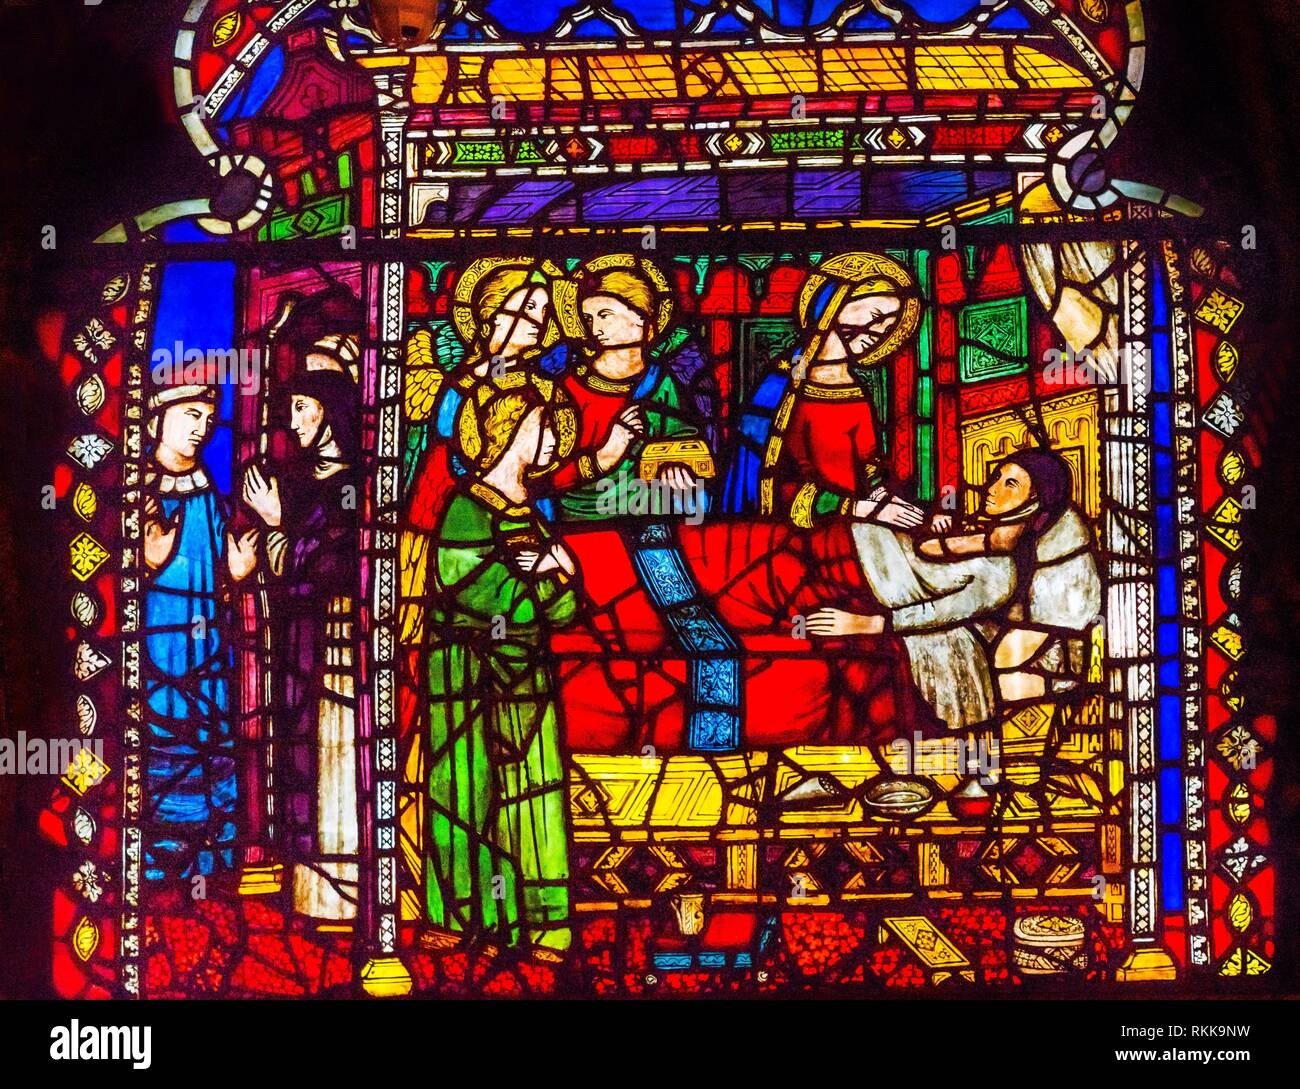 Virgin Mary Deathbed Stained Glass Window Orsanmichele Church Florence Italy. Church and stained glass from 1400s. Stock Photo